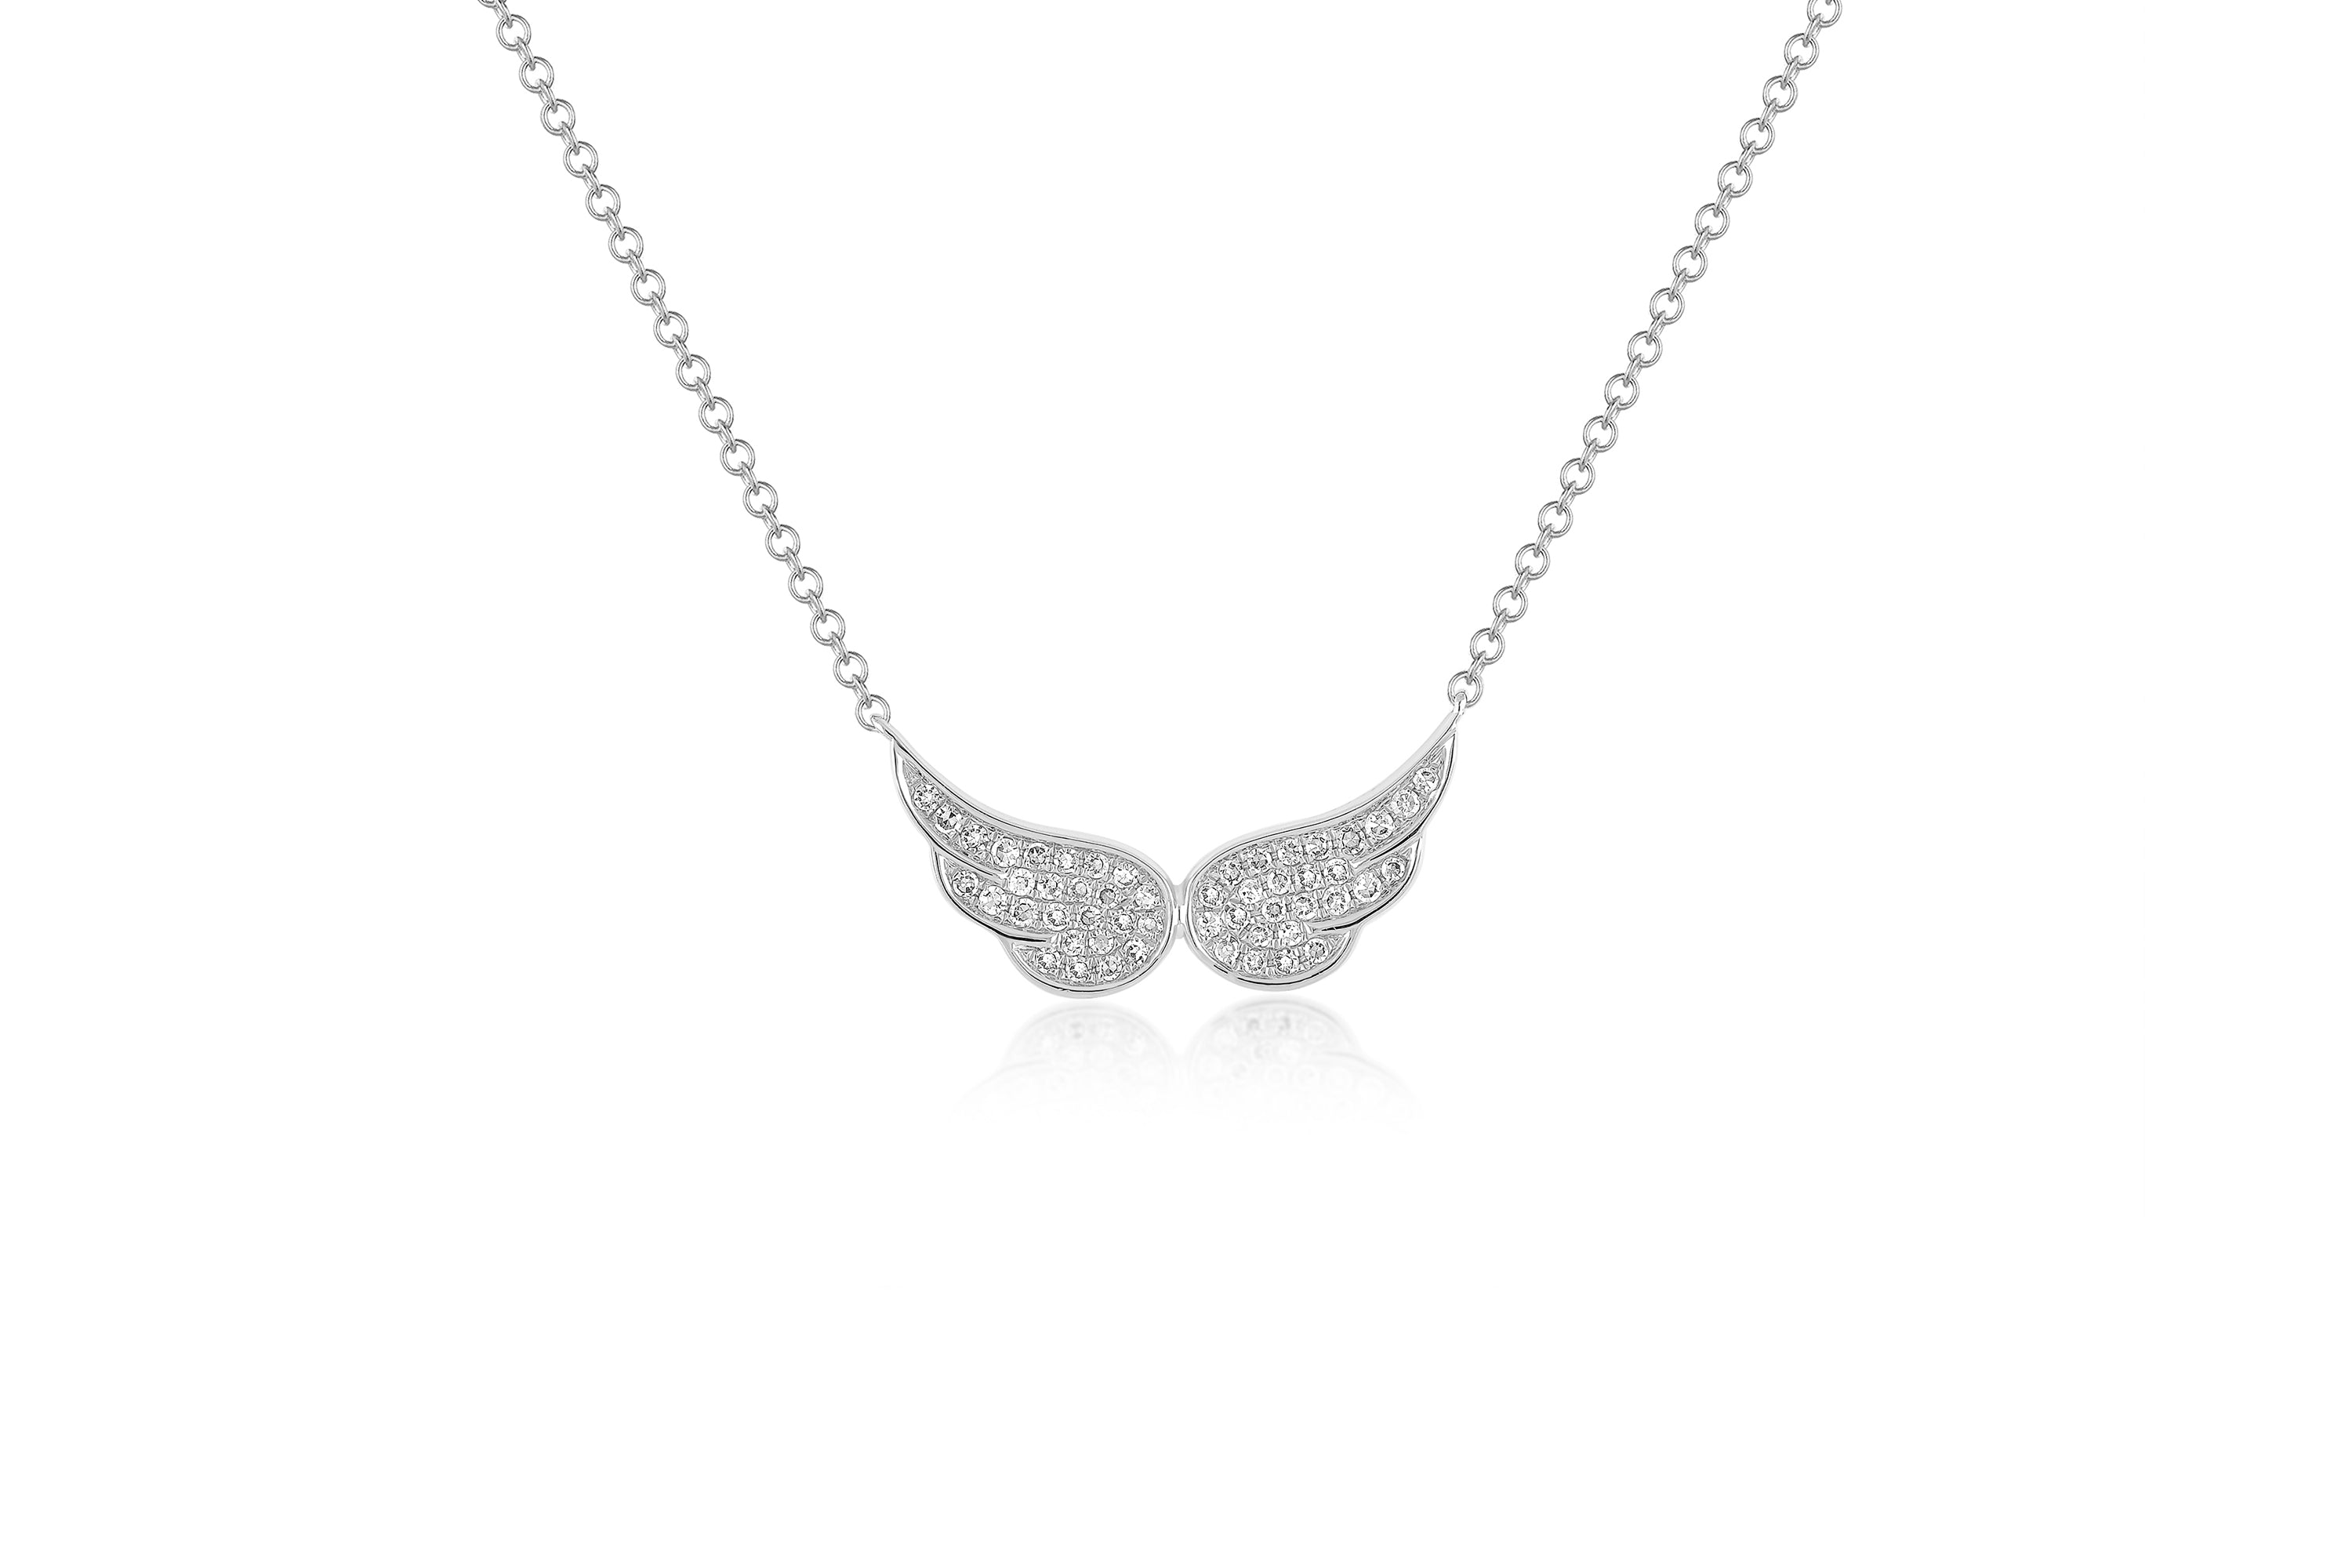 14k (karat) white gold necklaces with double angel wings encrusted with diamonds